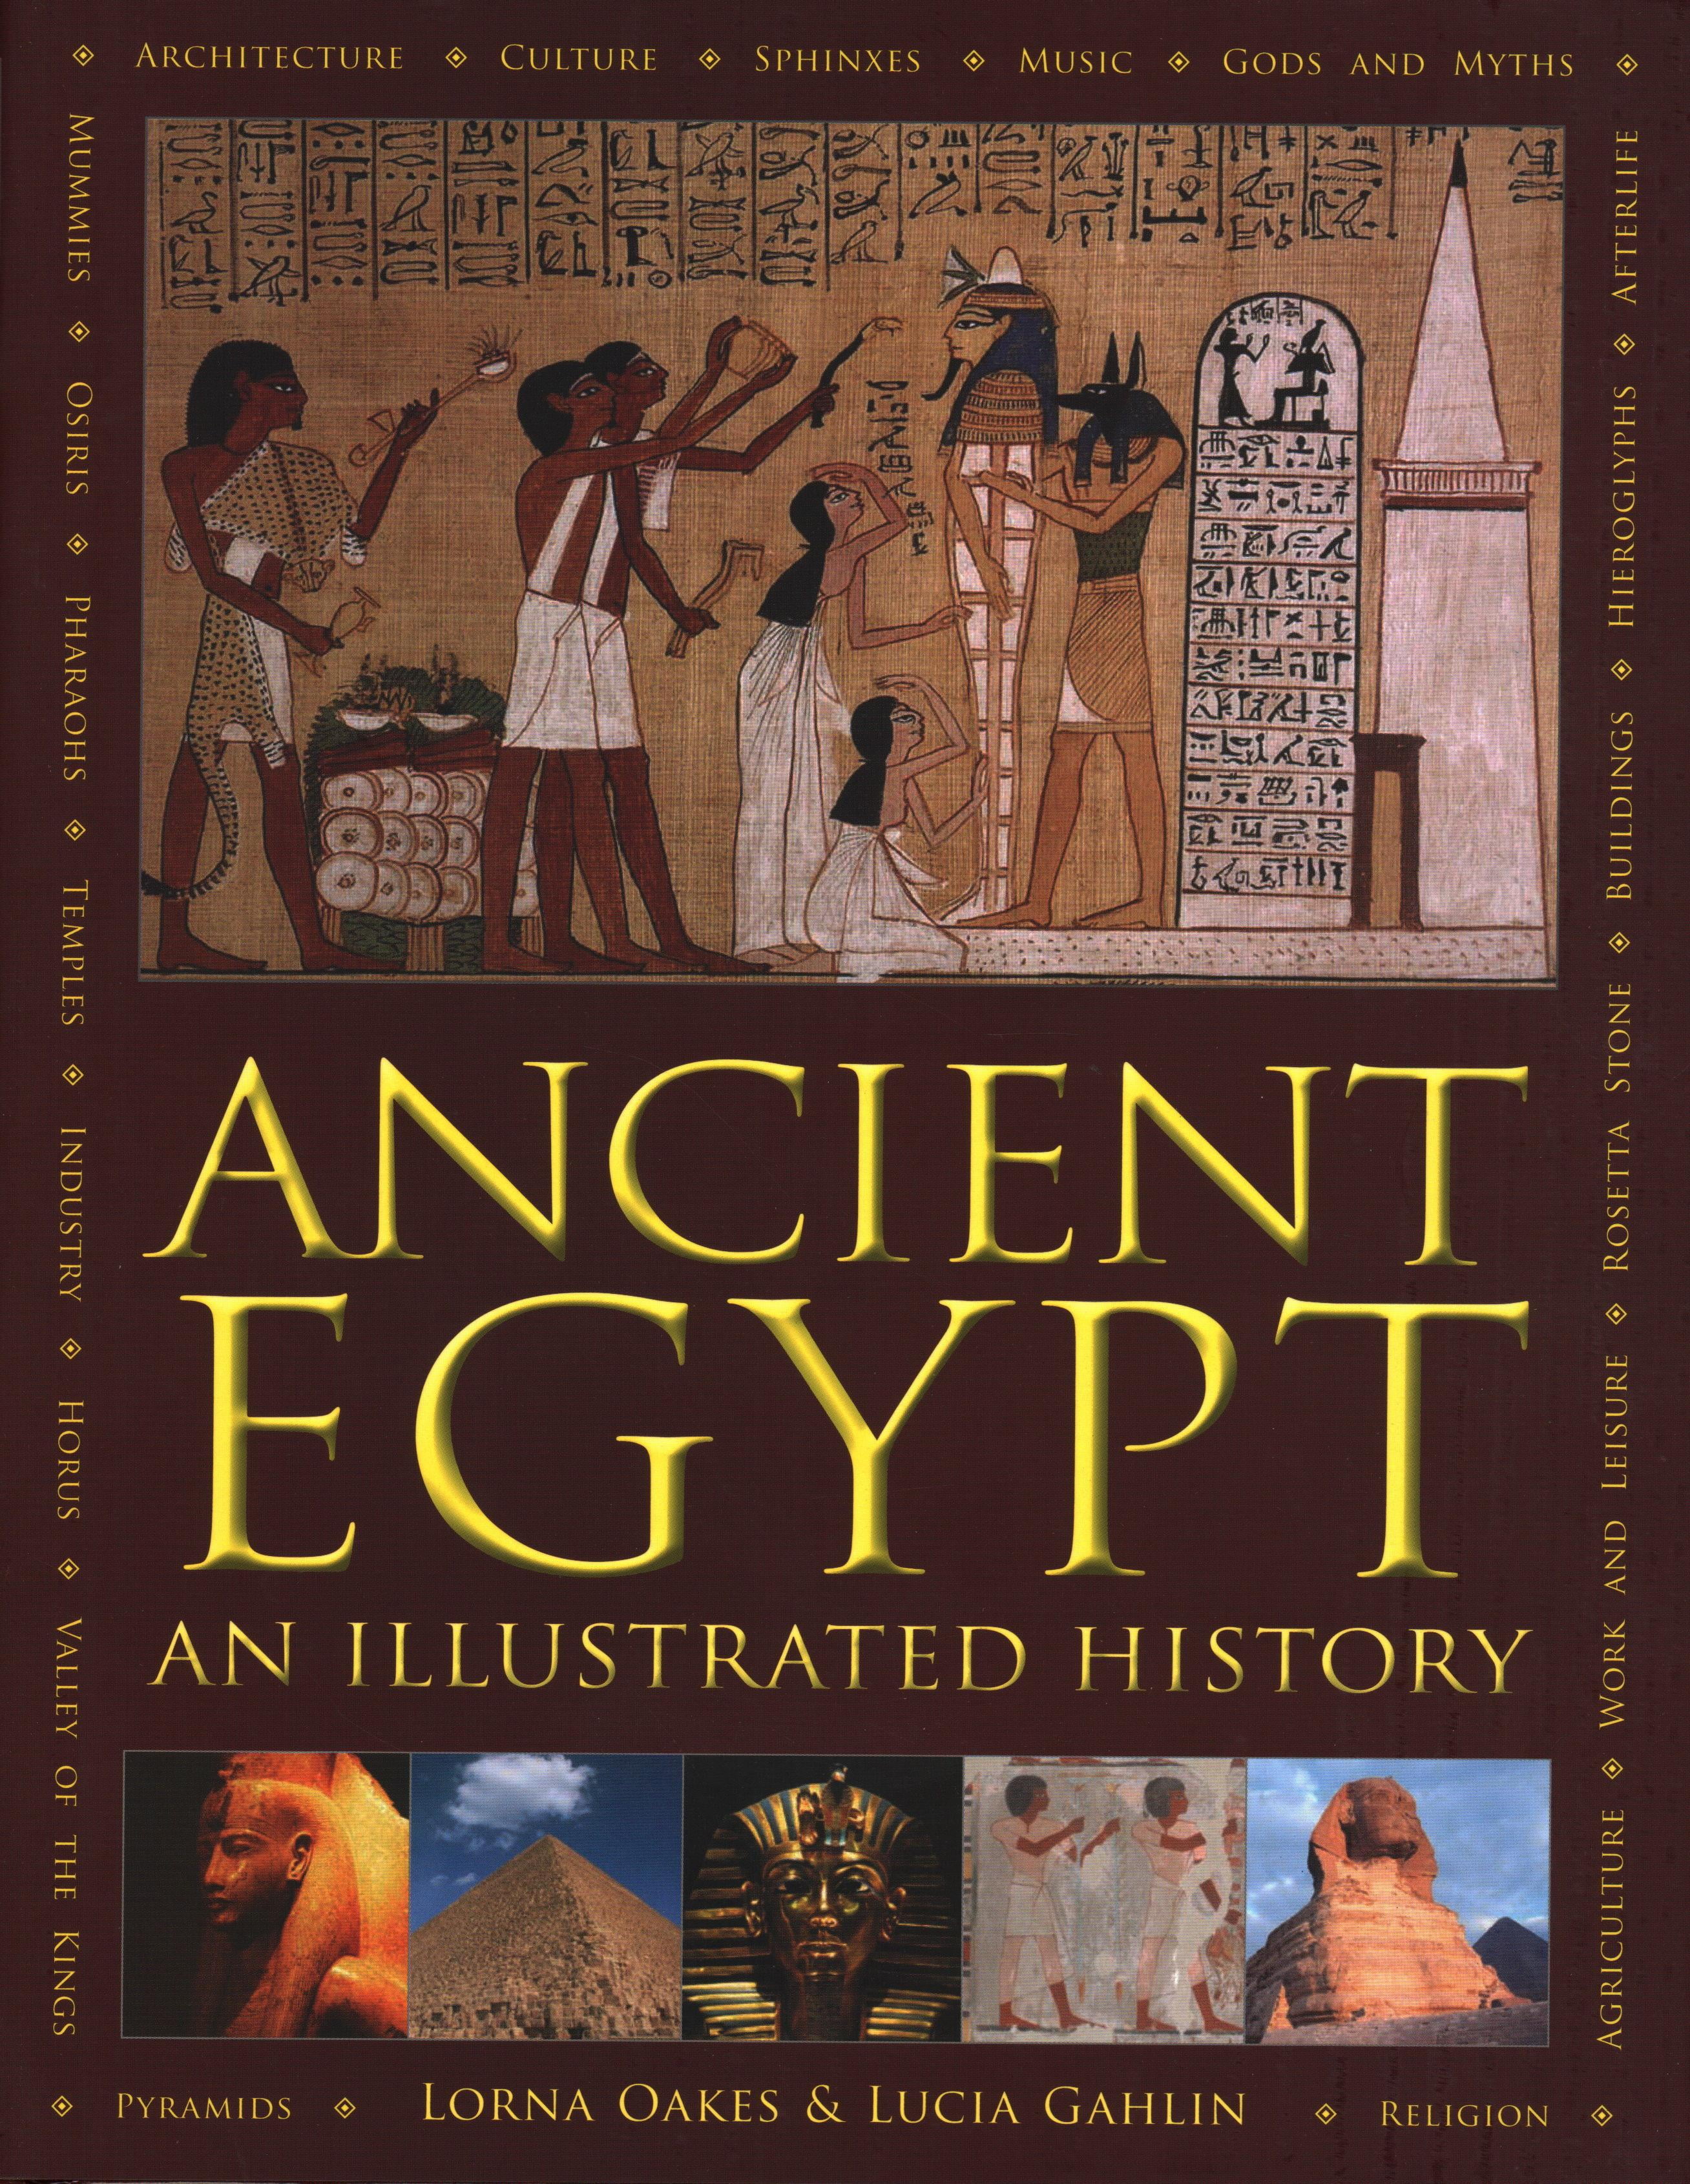 Ancient Egypt: An Illustrated History (Hardcover) - B79772c9 1c7f 4314 9276 8c62ef8fc516 2.ba26411768351a0f9D591774b75f4eD1